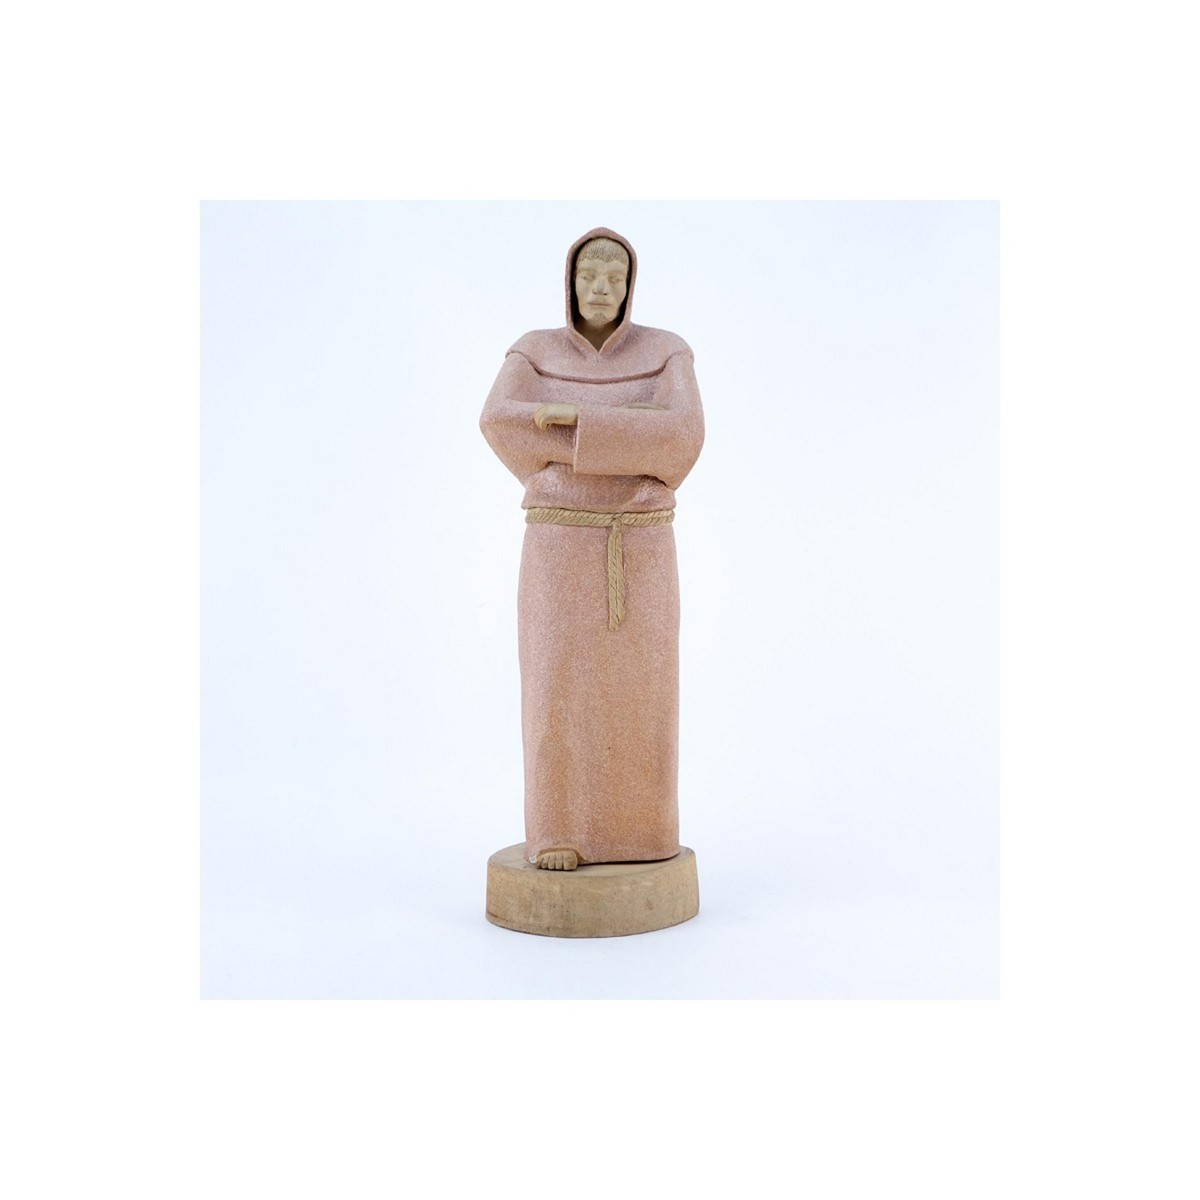 Large Vintage Pottery Figurine of a Monk